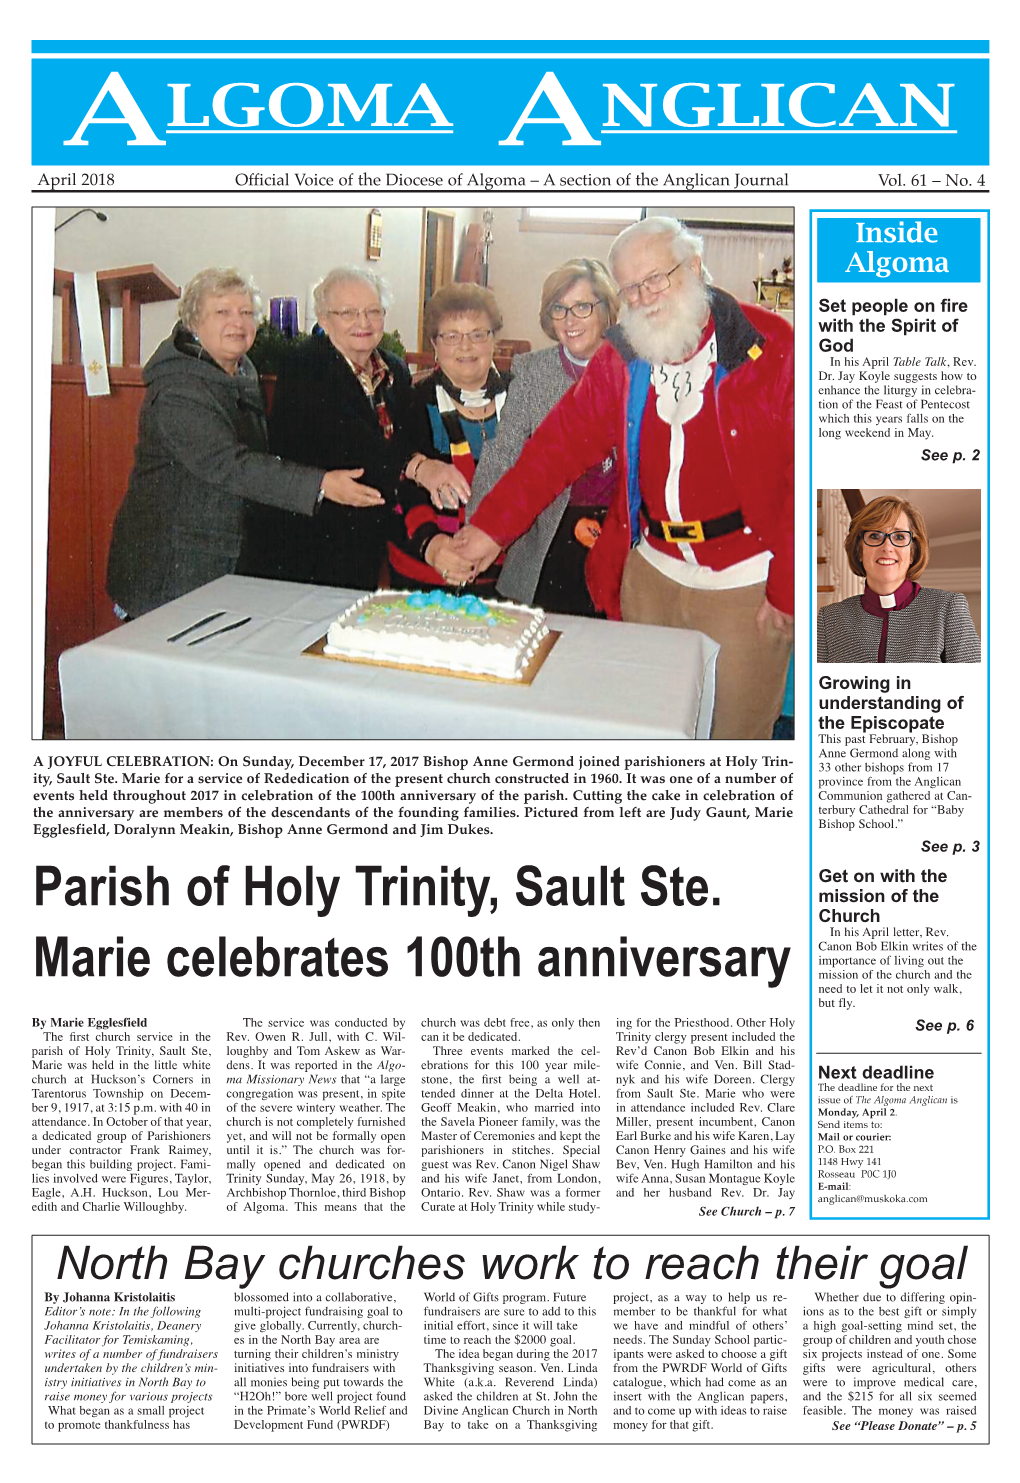 ALGOMA ANGLICAN April 2018 Official Voice of the Diocese of Algoma – a Section of the Anglican Journal Vol